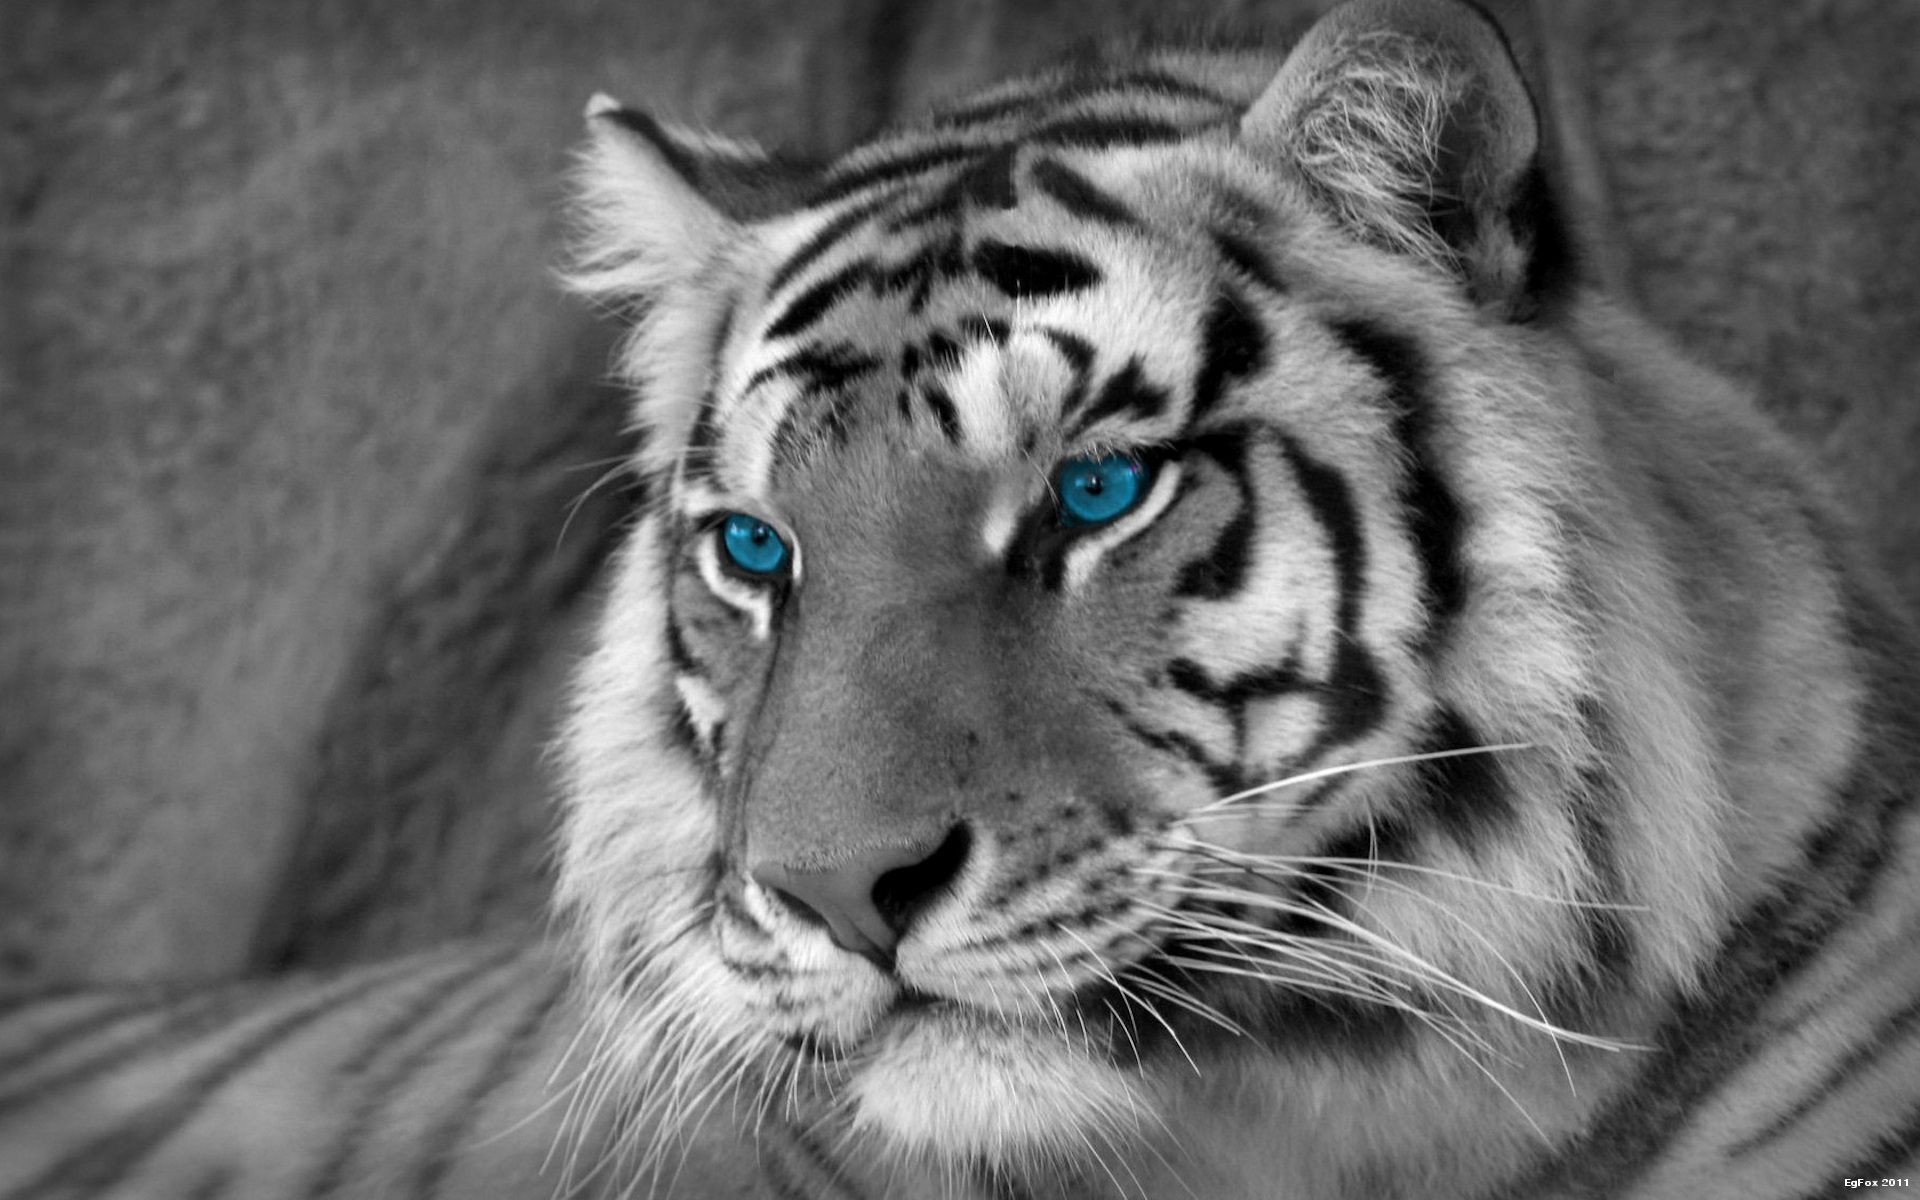 Wallpapers HD Iphone White Tigers Tiger White Lion Hd Full Hd Pics